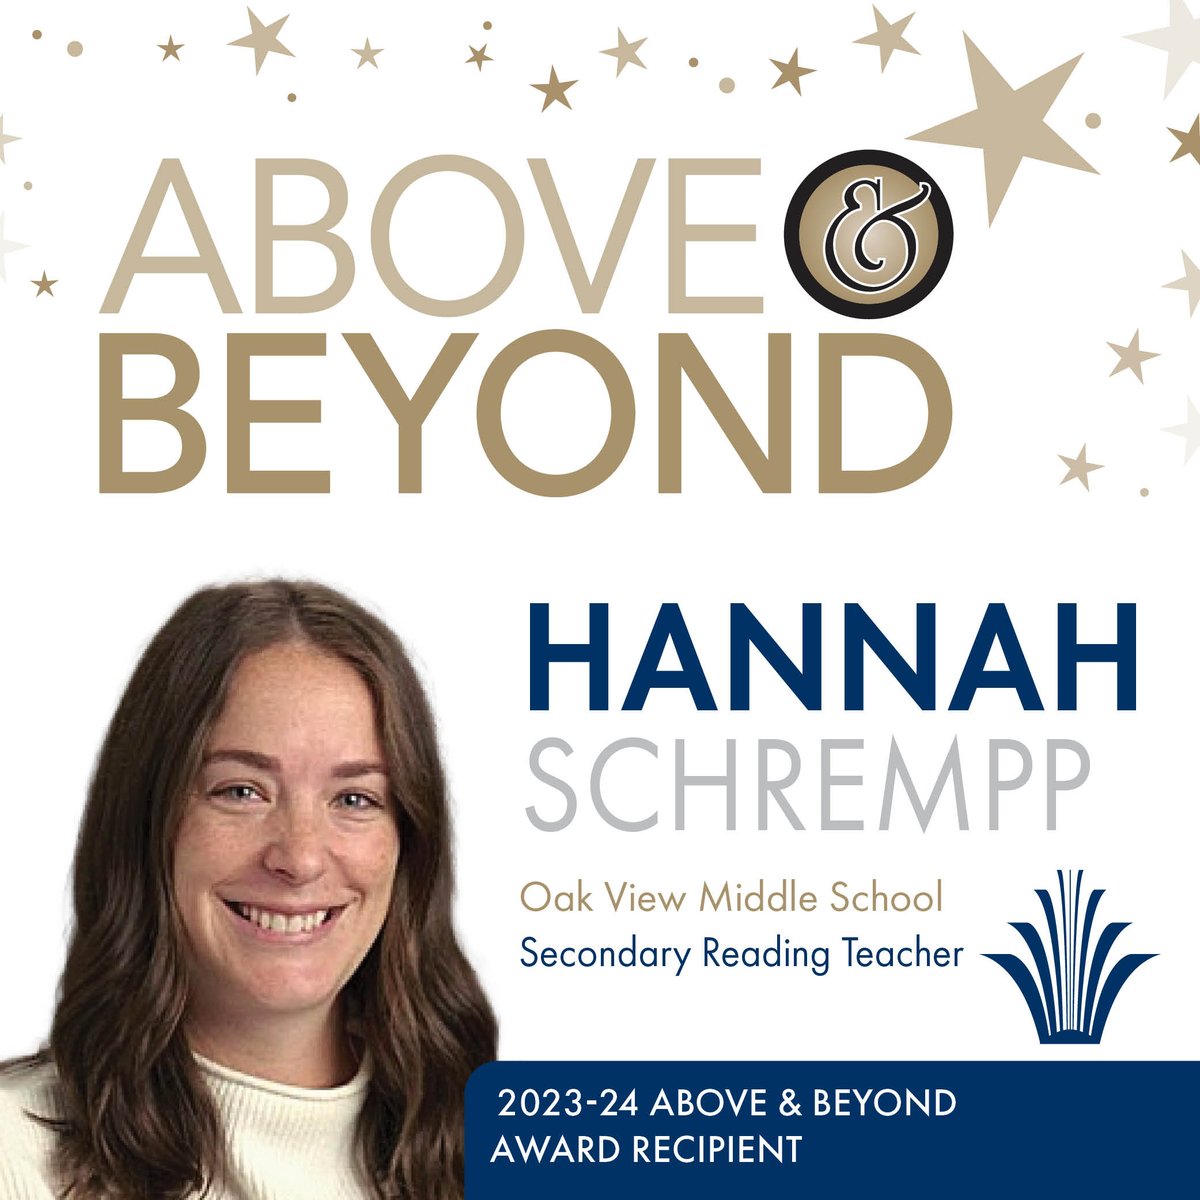 Congratulations to 2023-24 Above & Beyond Awards recipient: Hannah Schrempp! Schrempp strives to create a vibrant and inclusive classroom community where everyone feels seen, heard & genuinely loved. Read more about how Hannah has gone Above & Beyond: bit.ly/49DpH04